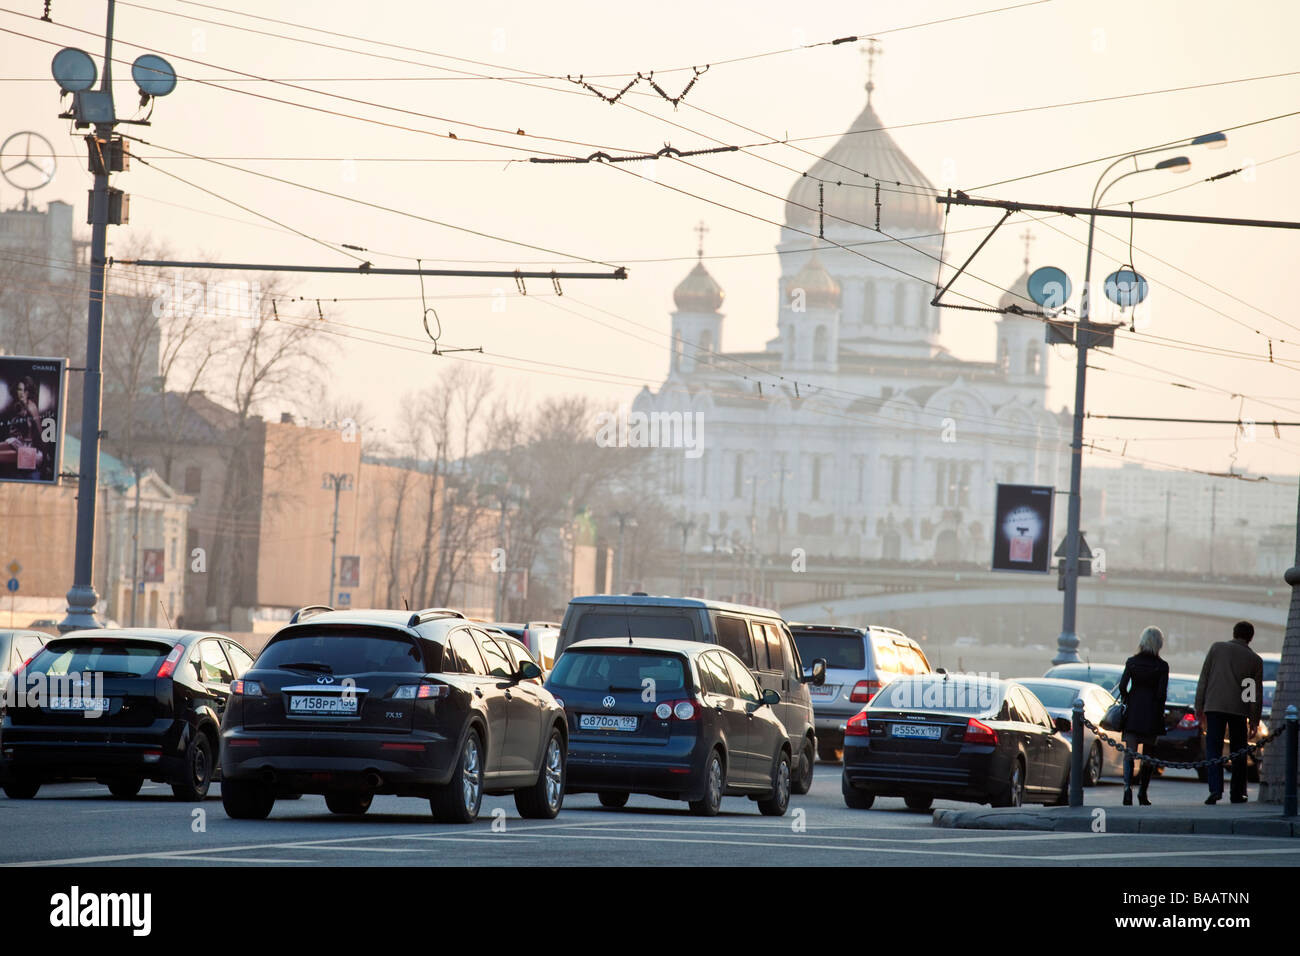 Huge traffic jam in the center of Moscow, Russia with Cathedral of Christ the Saviour in the background Stock Photo